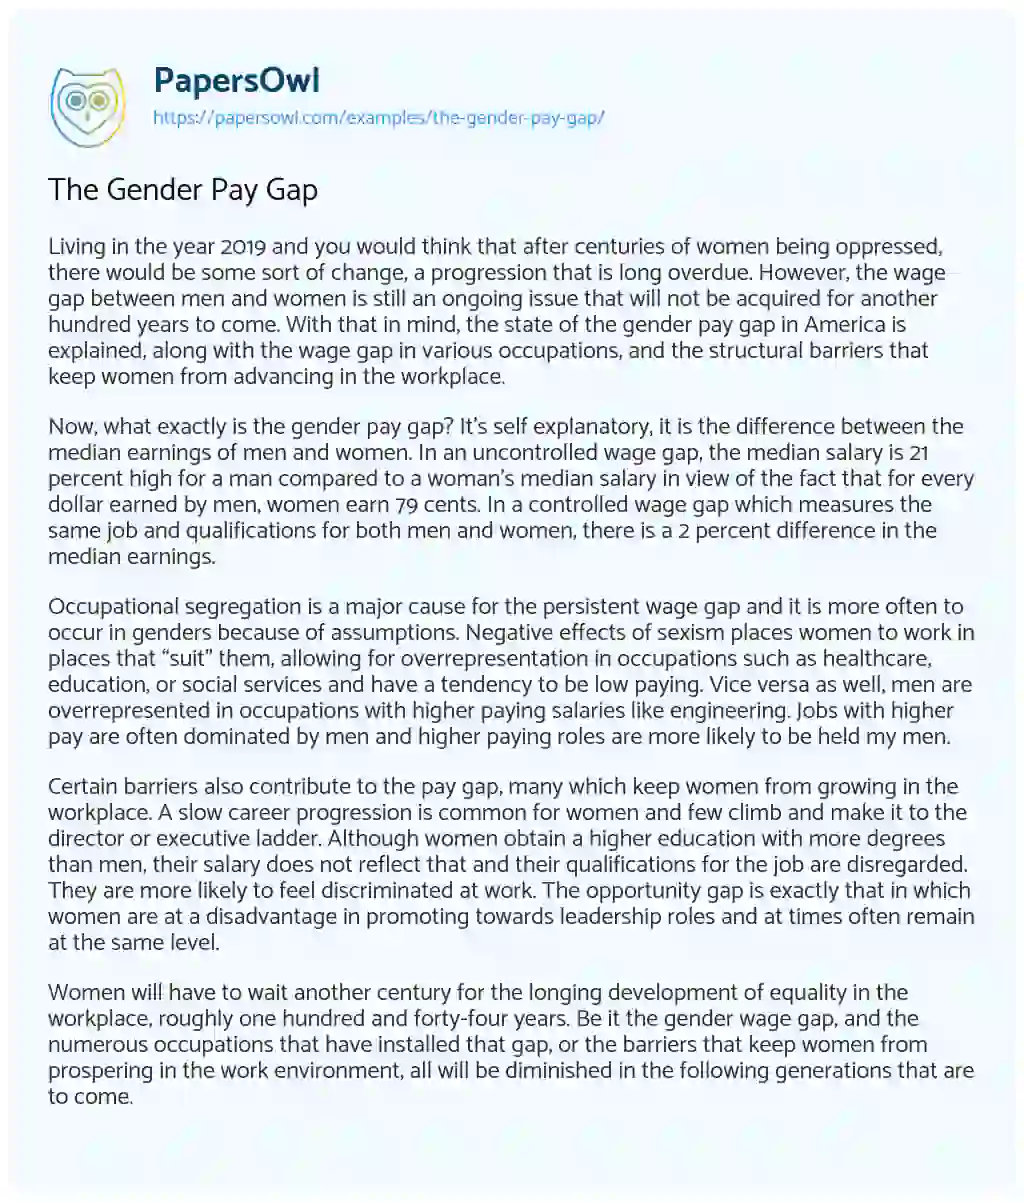 Essay on The Gender Pay Gap